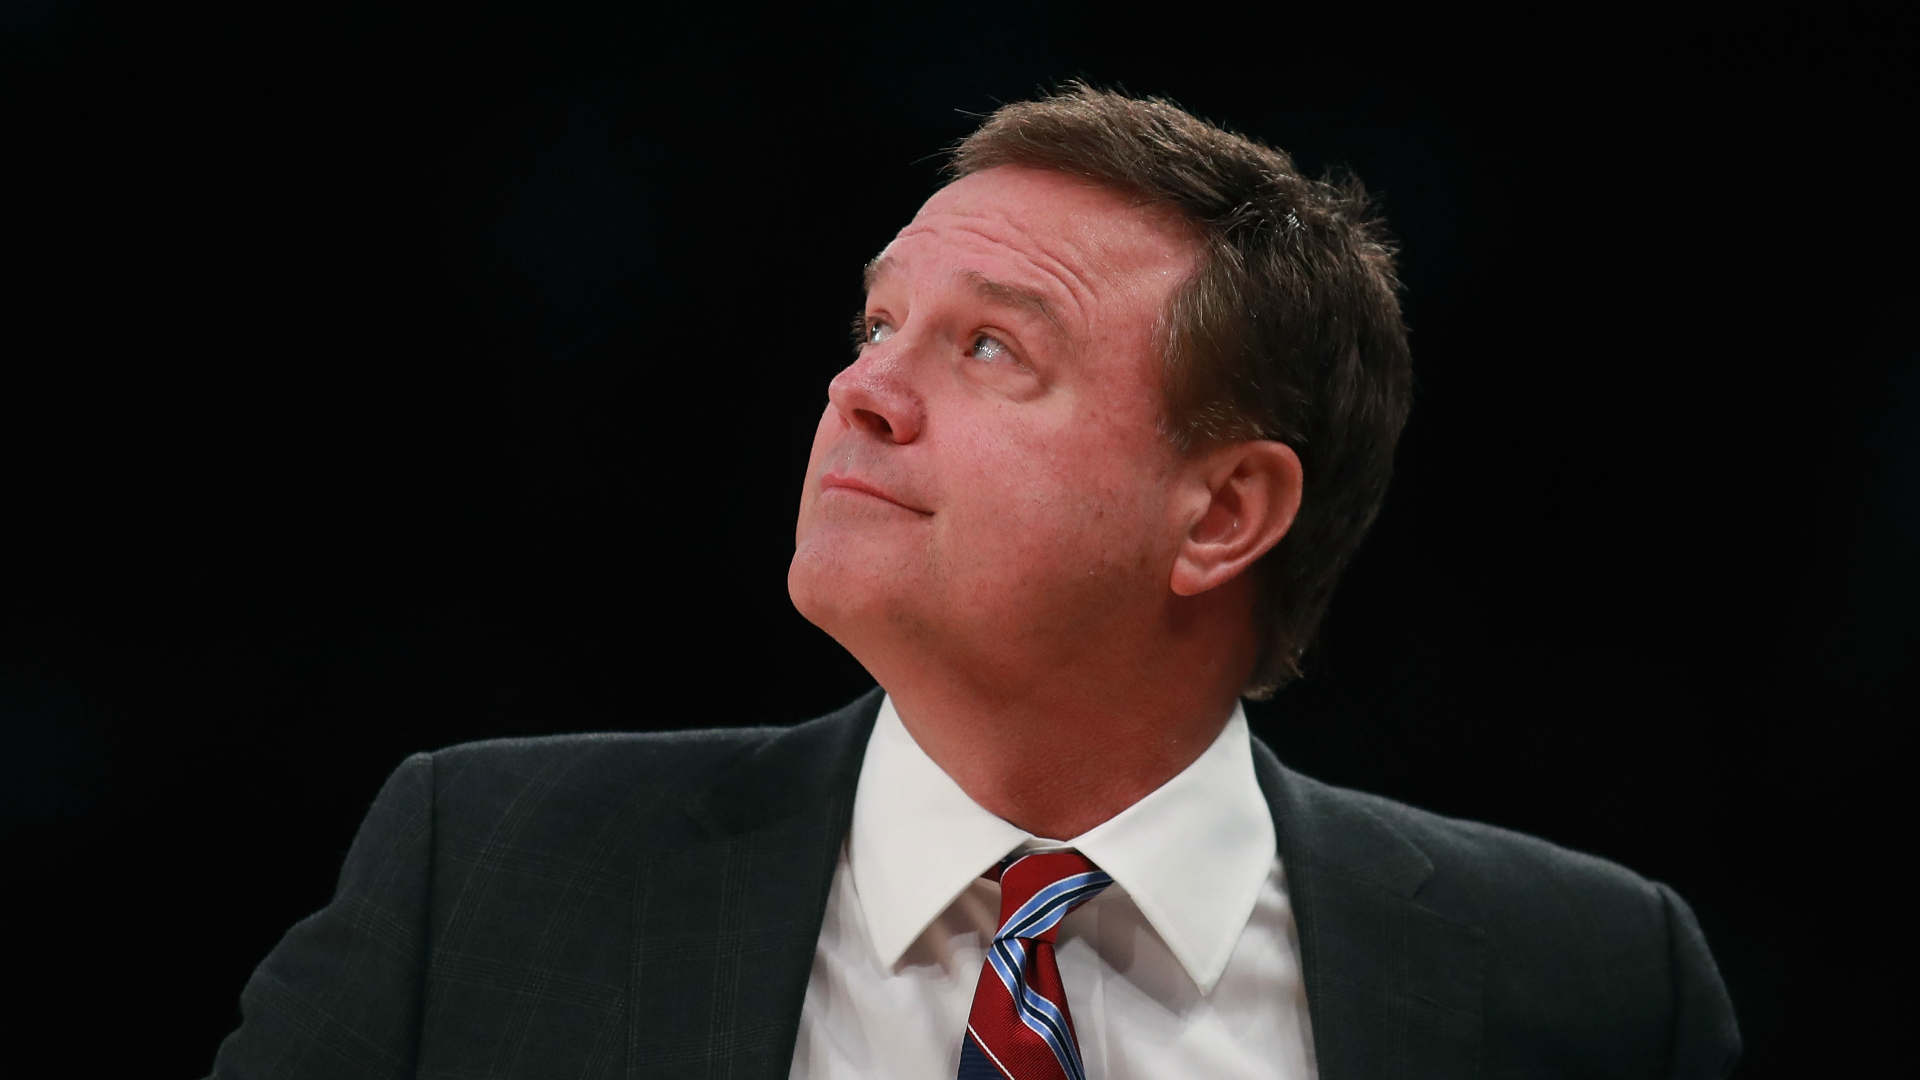 Bill Self's early retirement dream at Kansas is an old story that never